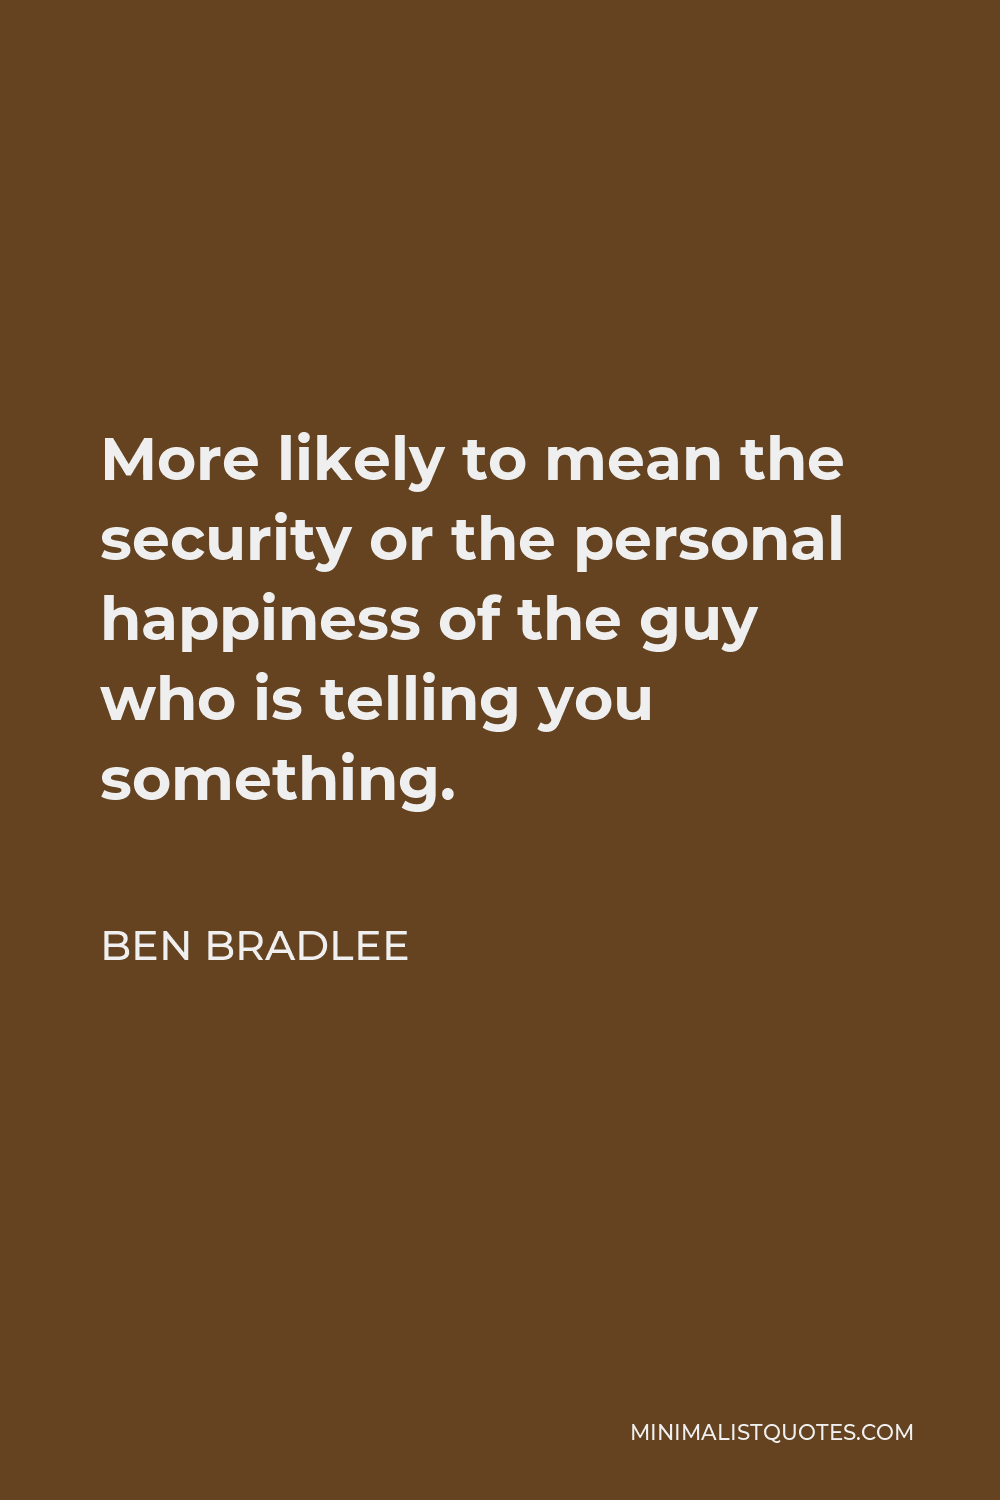 Ben Bradlee Quote - More likely to mean the security or the personal happiness of the guy who is telling you something.